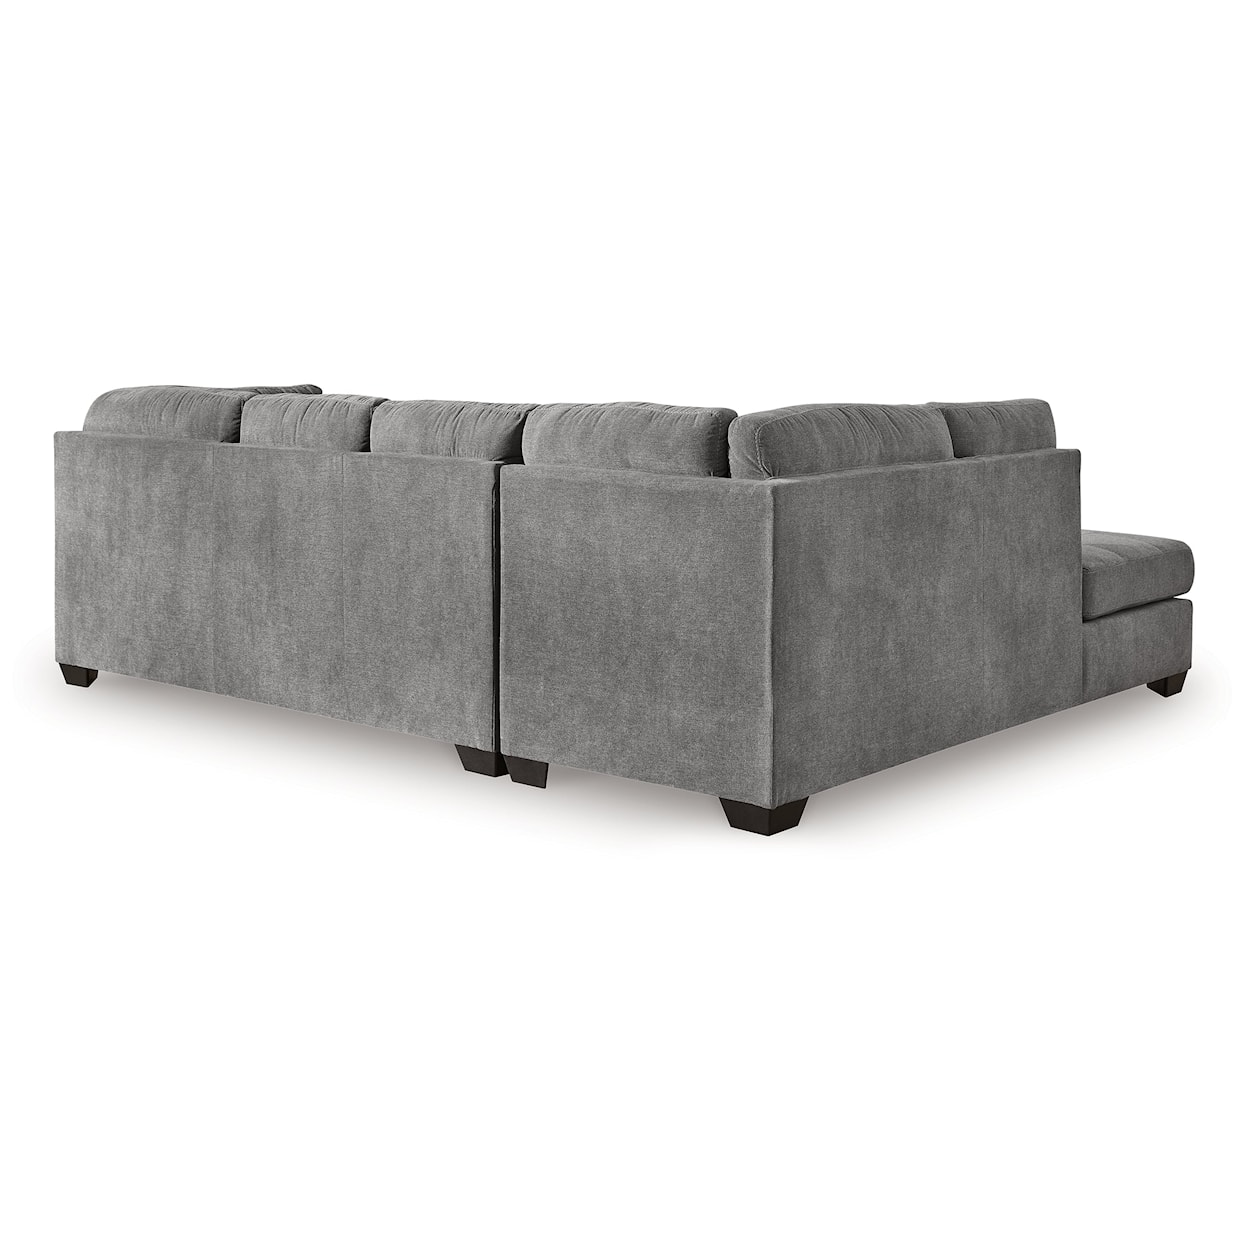 Michael Alan Select Marleton 2-Piece Sleeper Sectional with Chaise